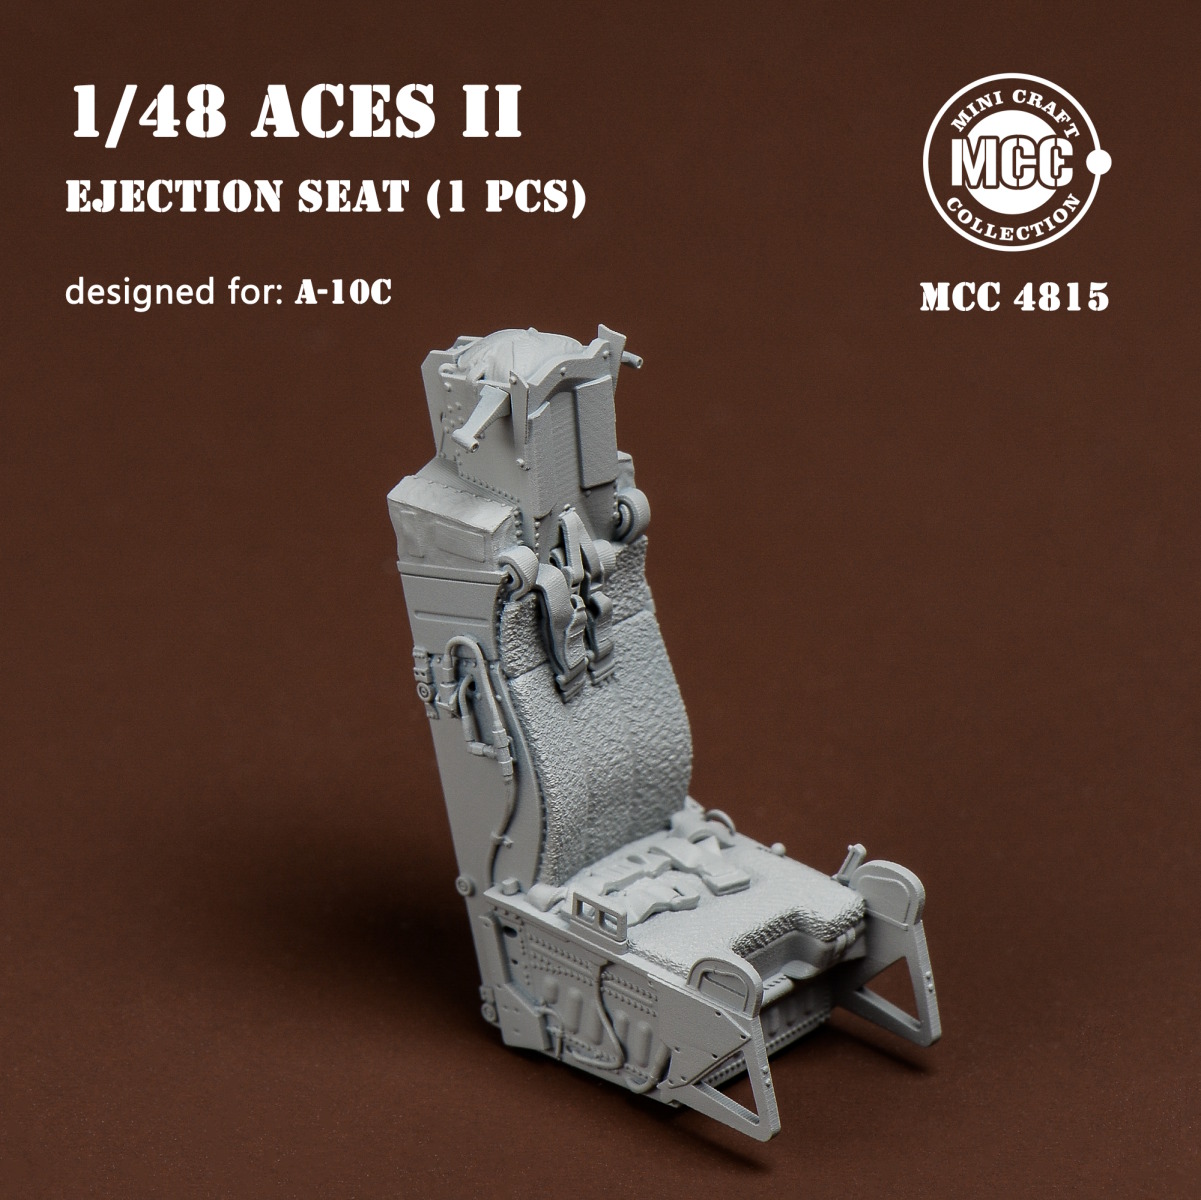 1/48 ACES II Ejection Seat for A-10A/C (1pcs)